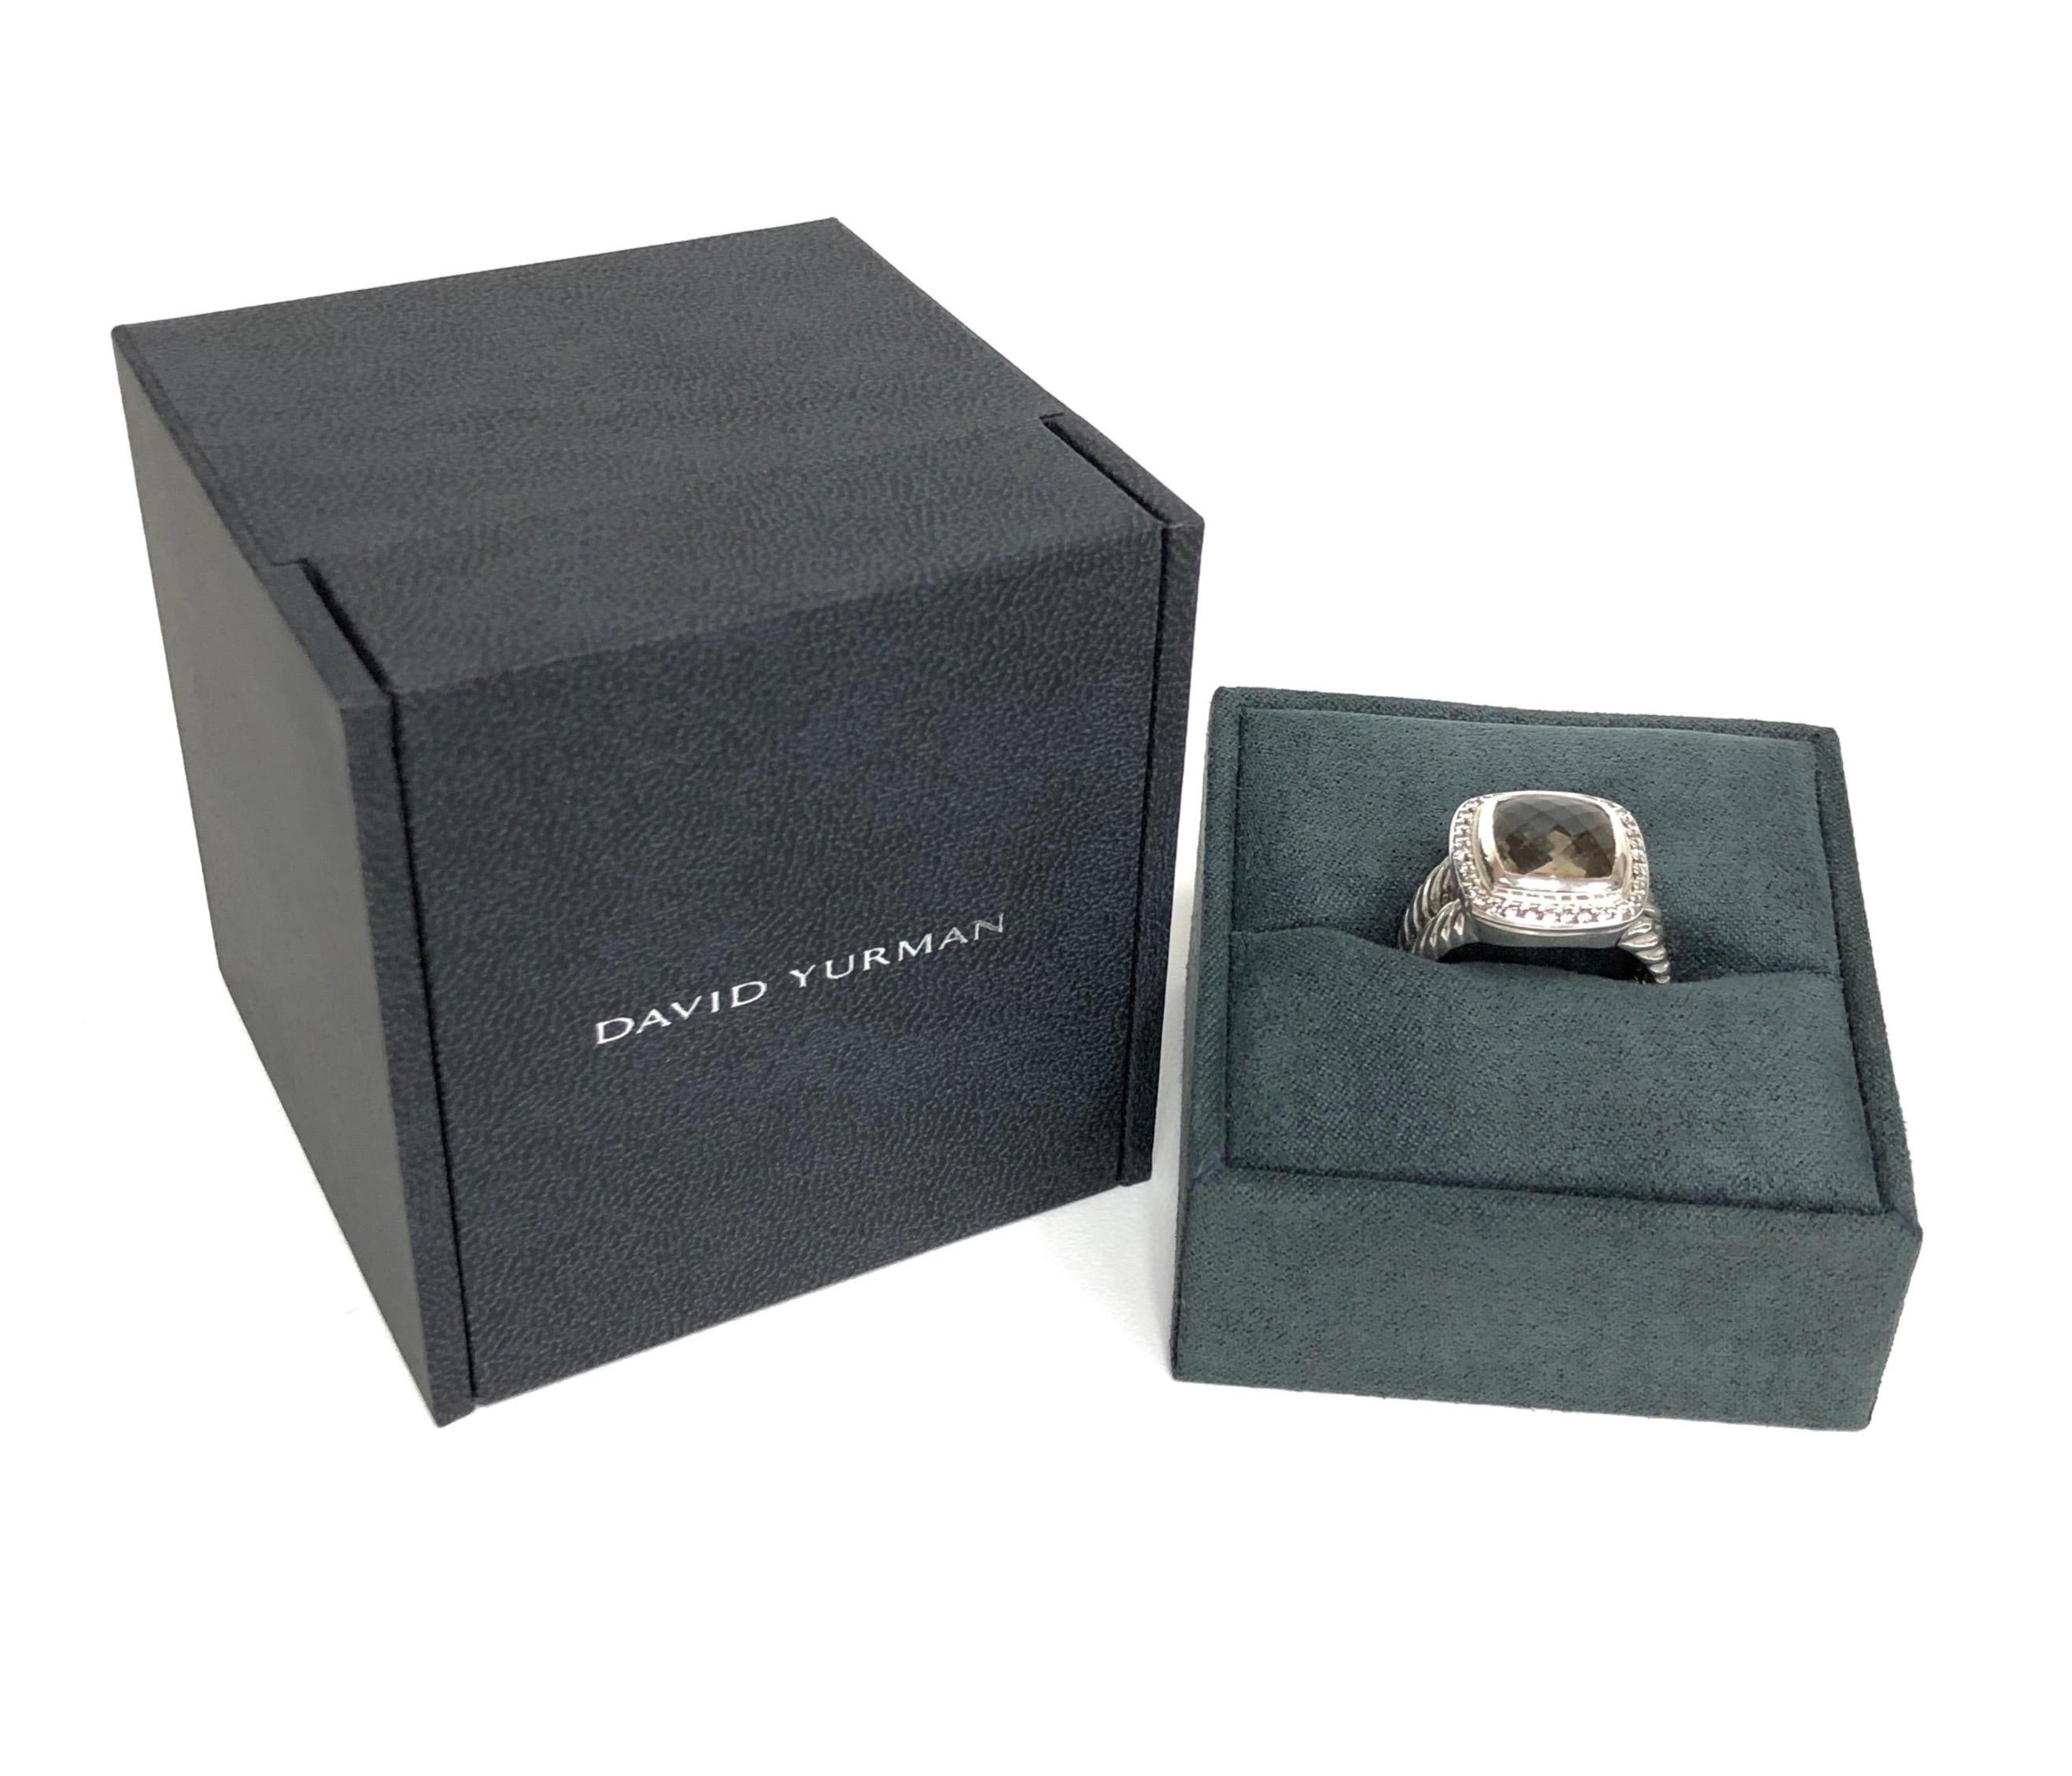 David Yurman Sterling Silver Smoky Quartz Albion Diamond Halo Ring In Excellent Condition For Sale In New York, NY